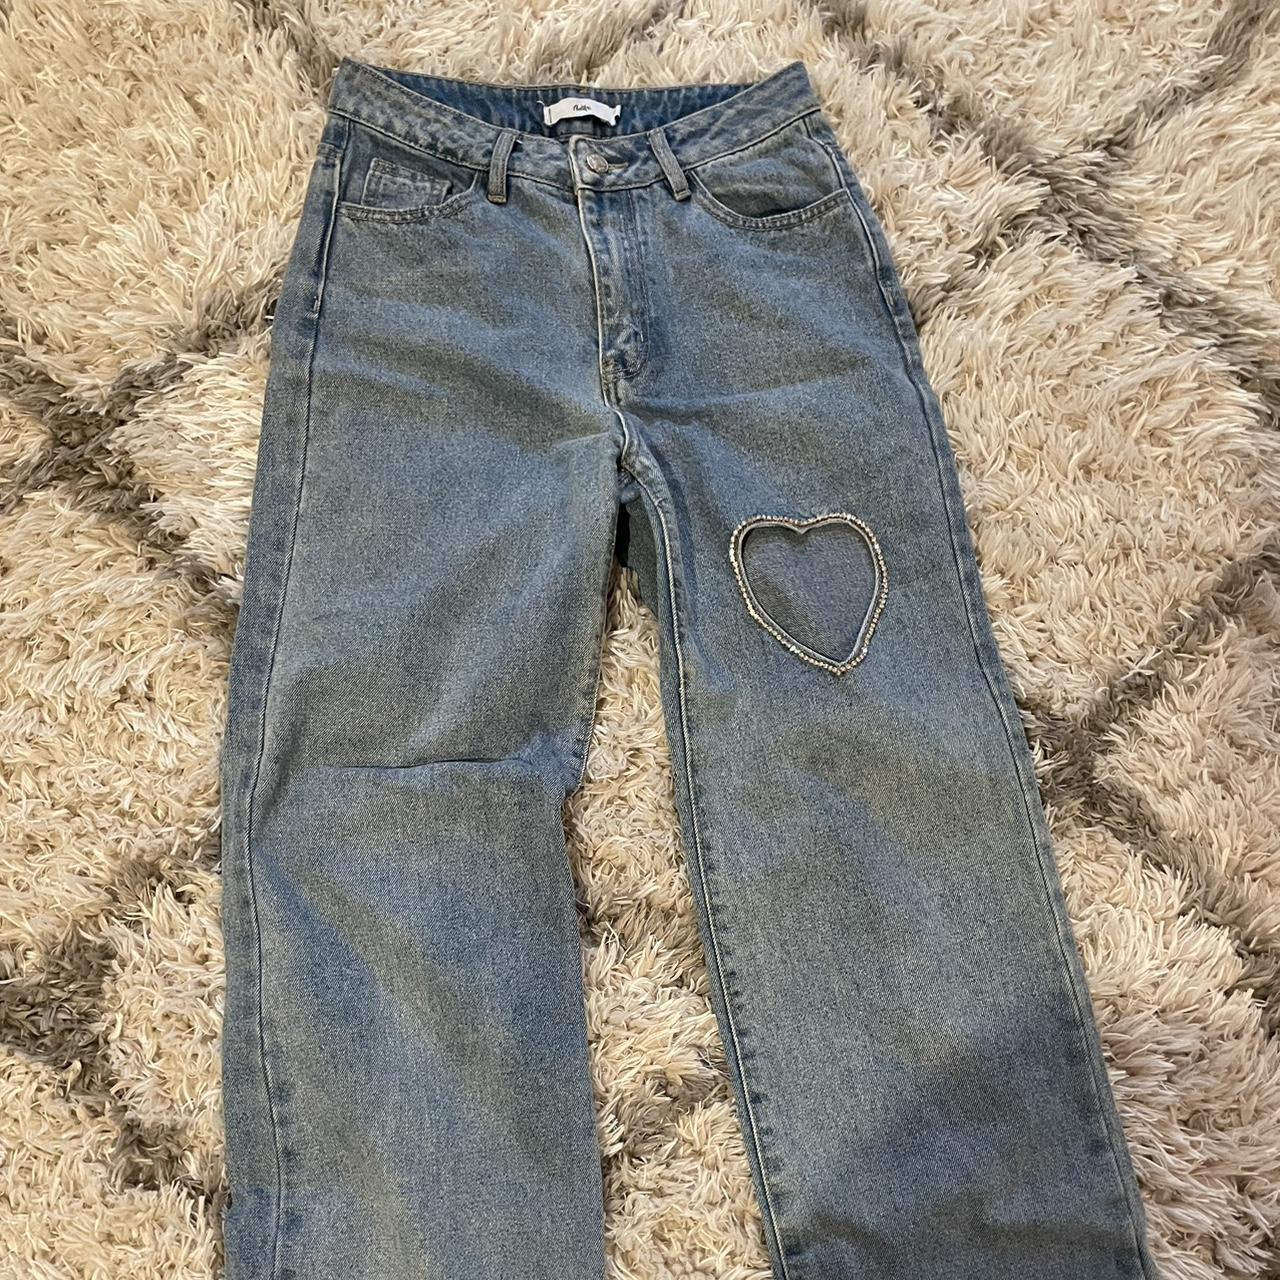 Adika jeans size small! Straight leg with heart in... - Depop